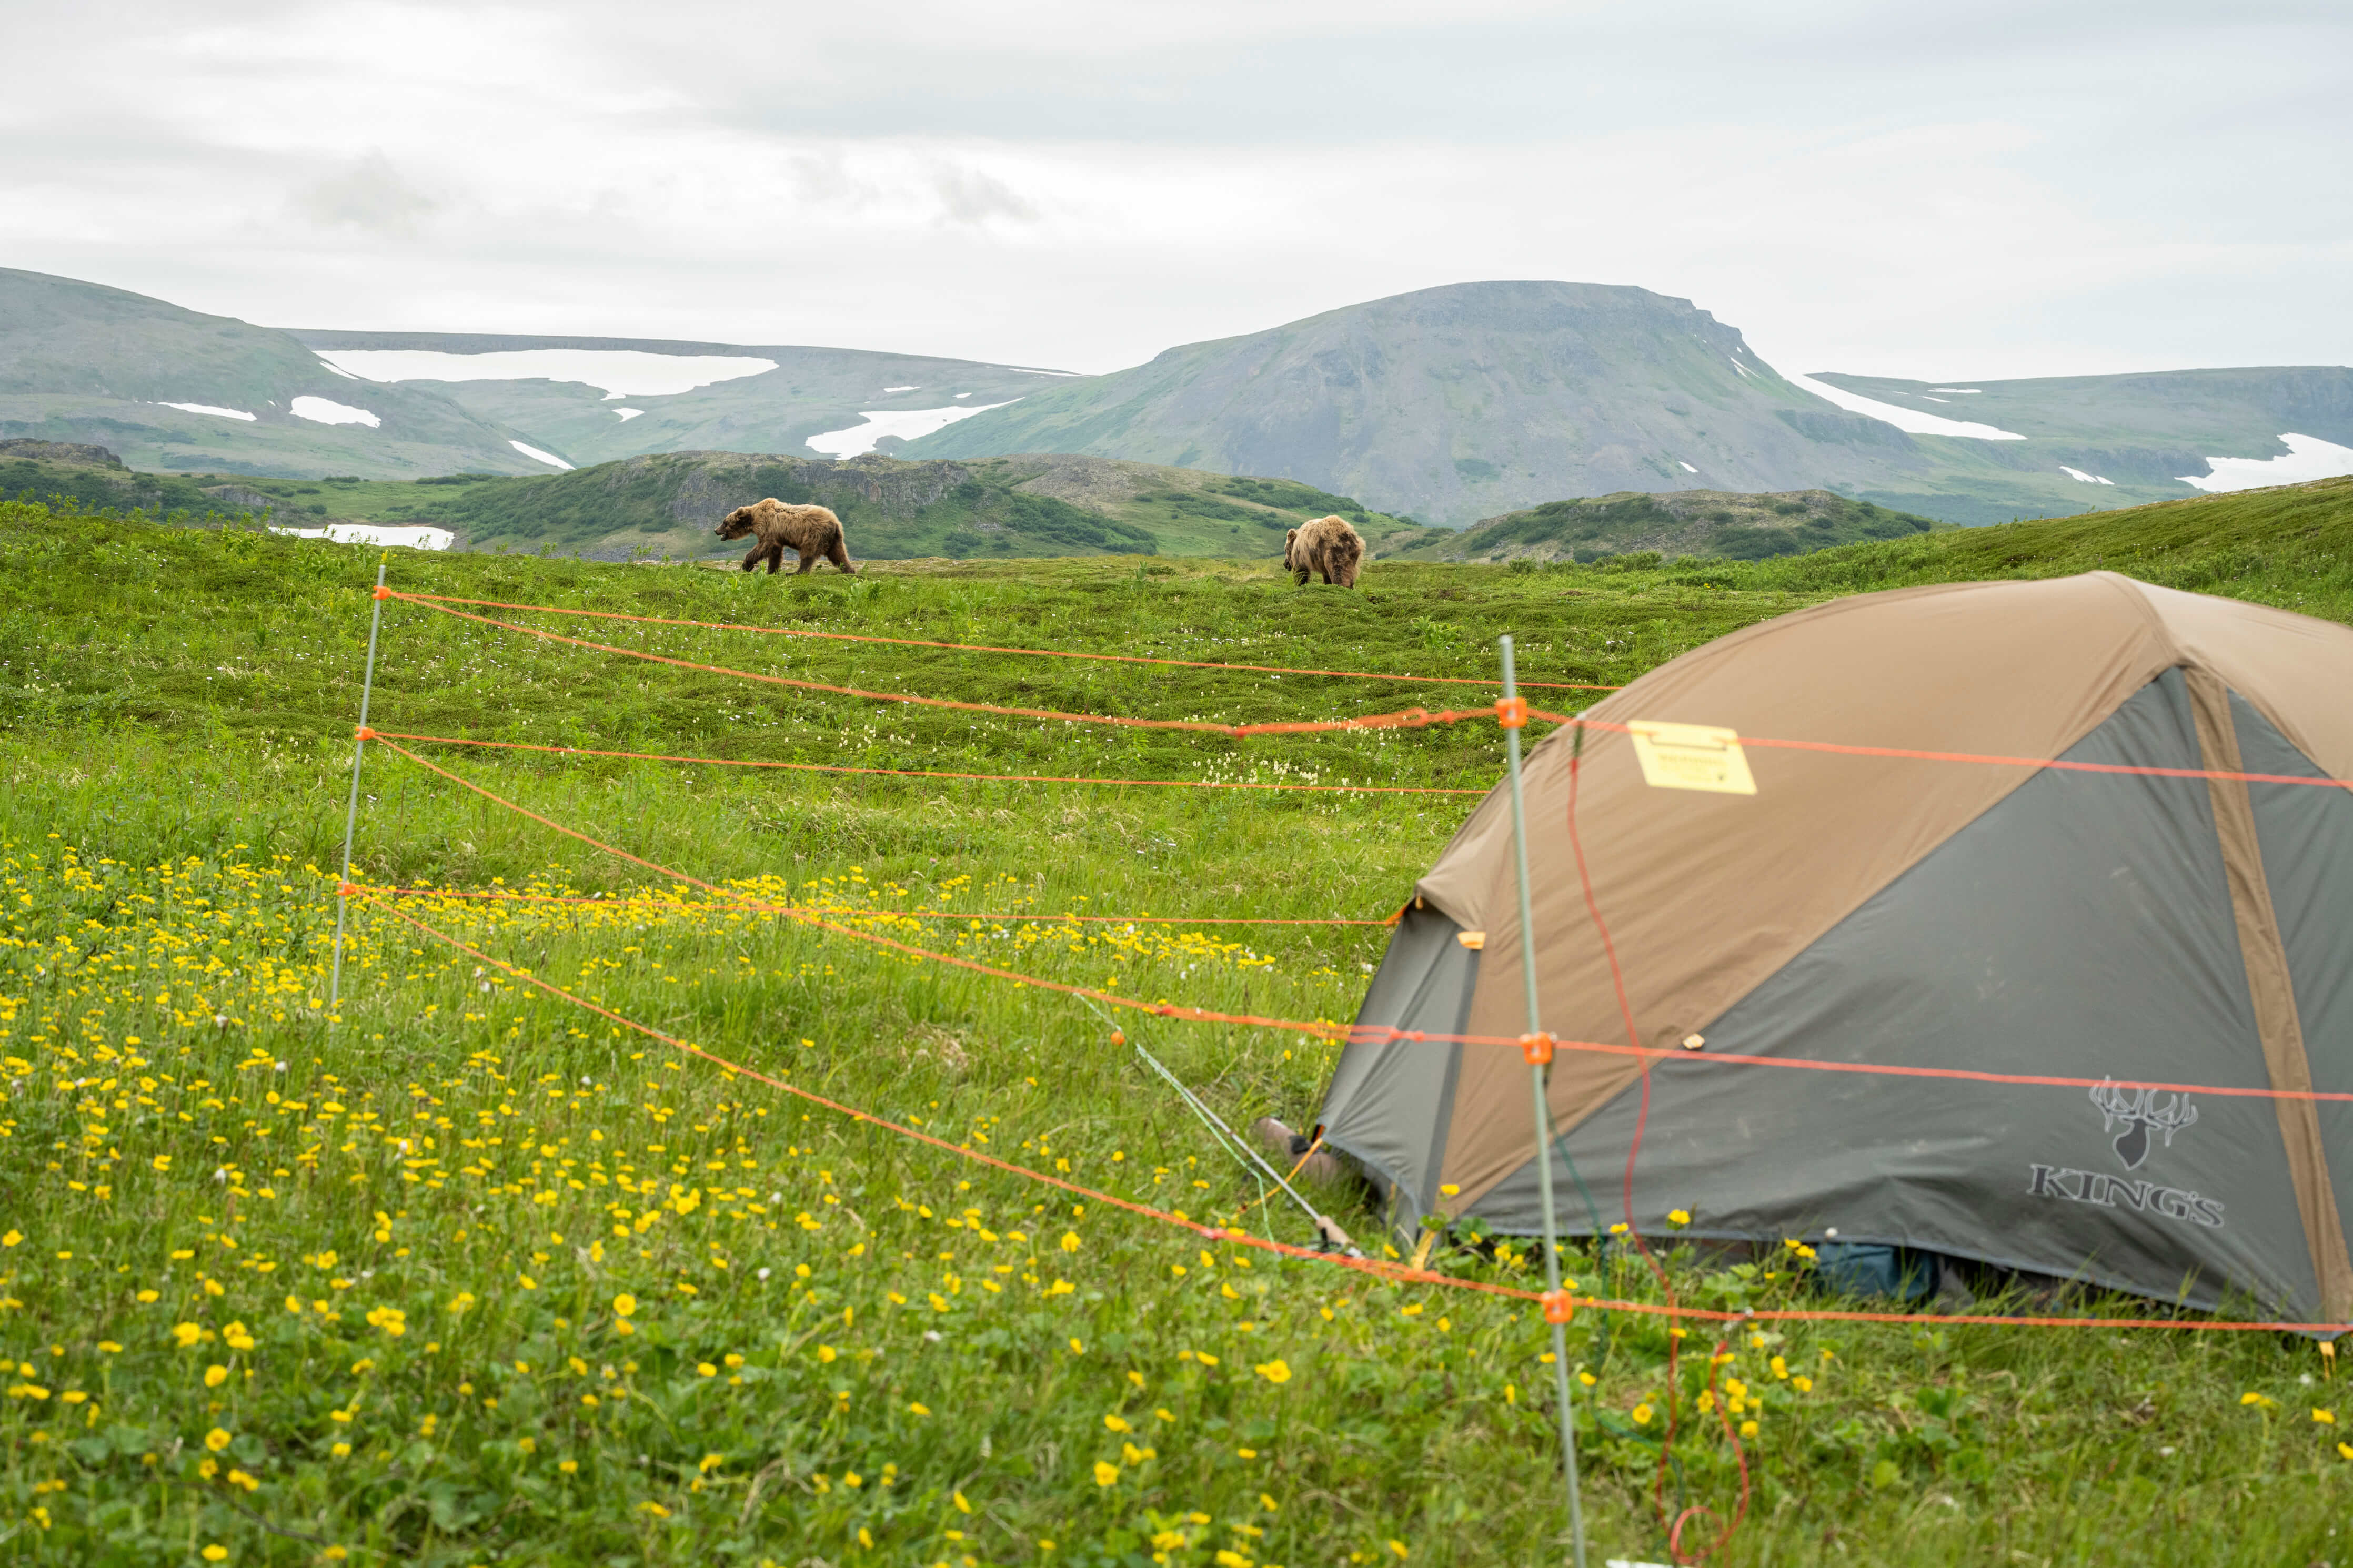 Electric Fence set up around tent with bears in the background